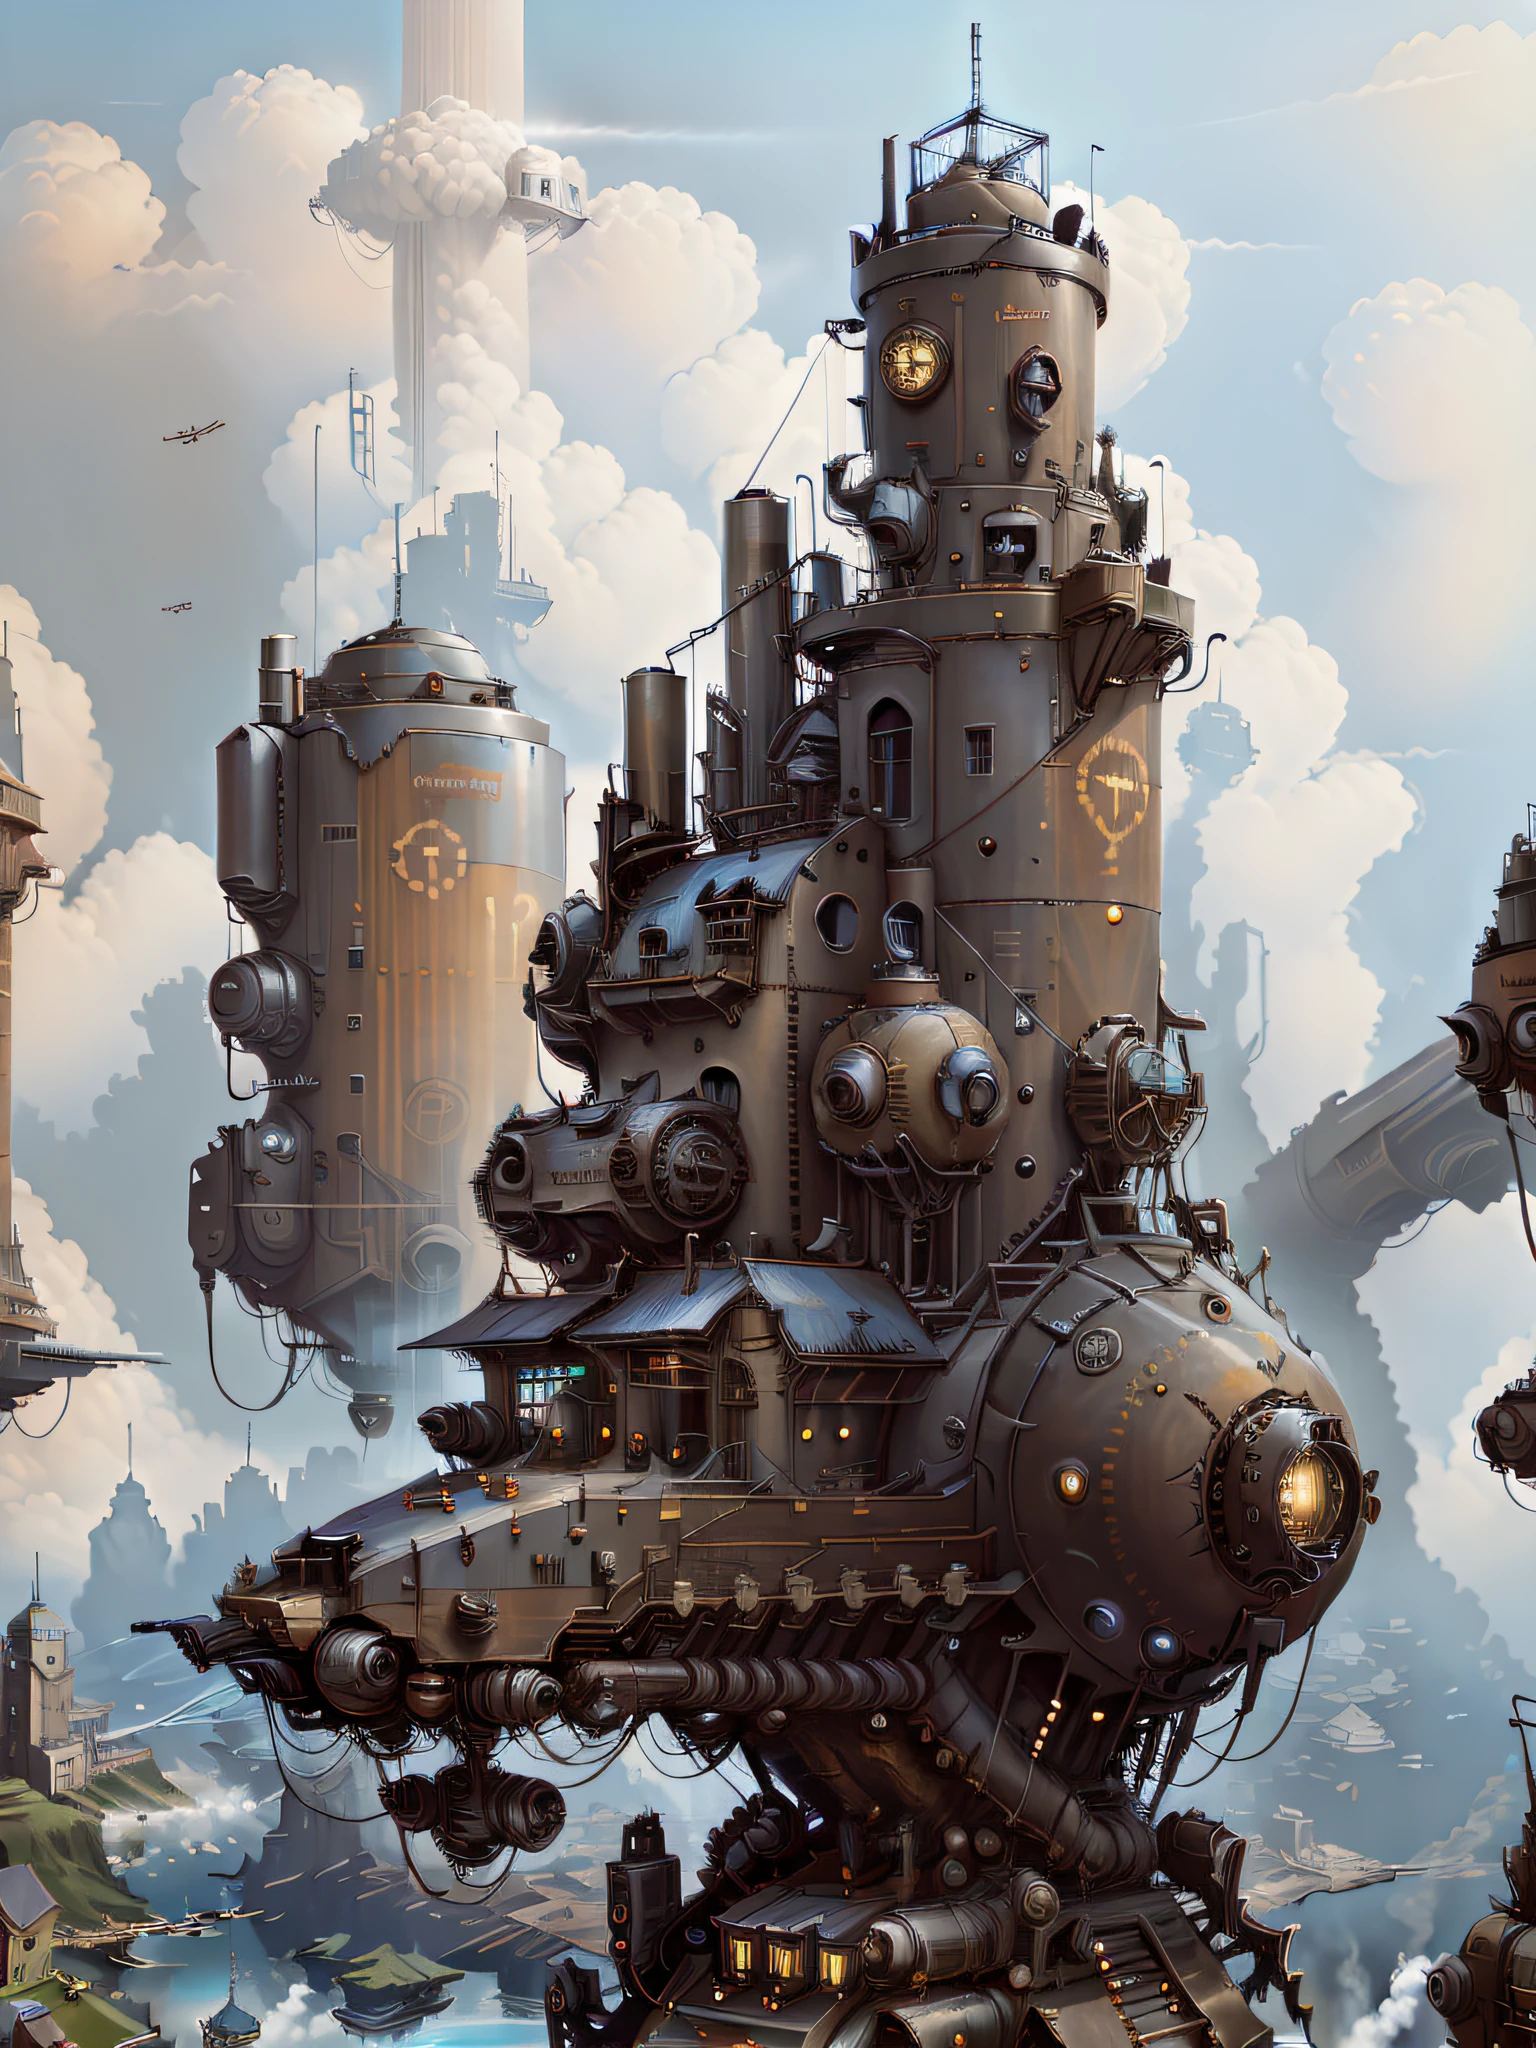 there are many different types of buildings in this picture, in steampunk cityscape, flying cloud castle, a steampunk city, steampunk concept art, steampunk villages castles, victorian steampunk mega city, steampunk city, inspired by Ian McQue, very far royal steampunk castle, steampunk city background, ancient steampunk city, detailed digital concept art, flying ships in the background